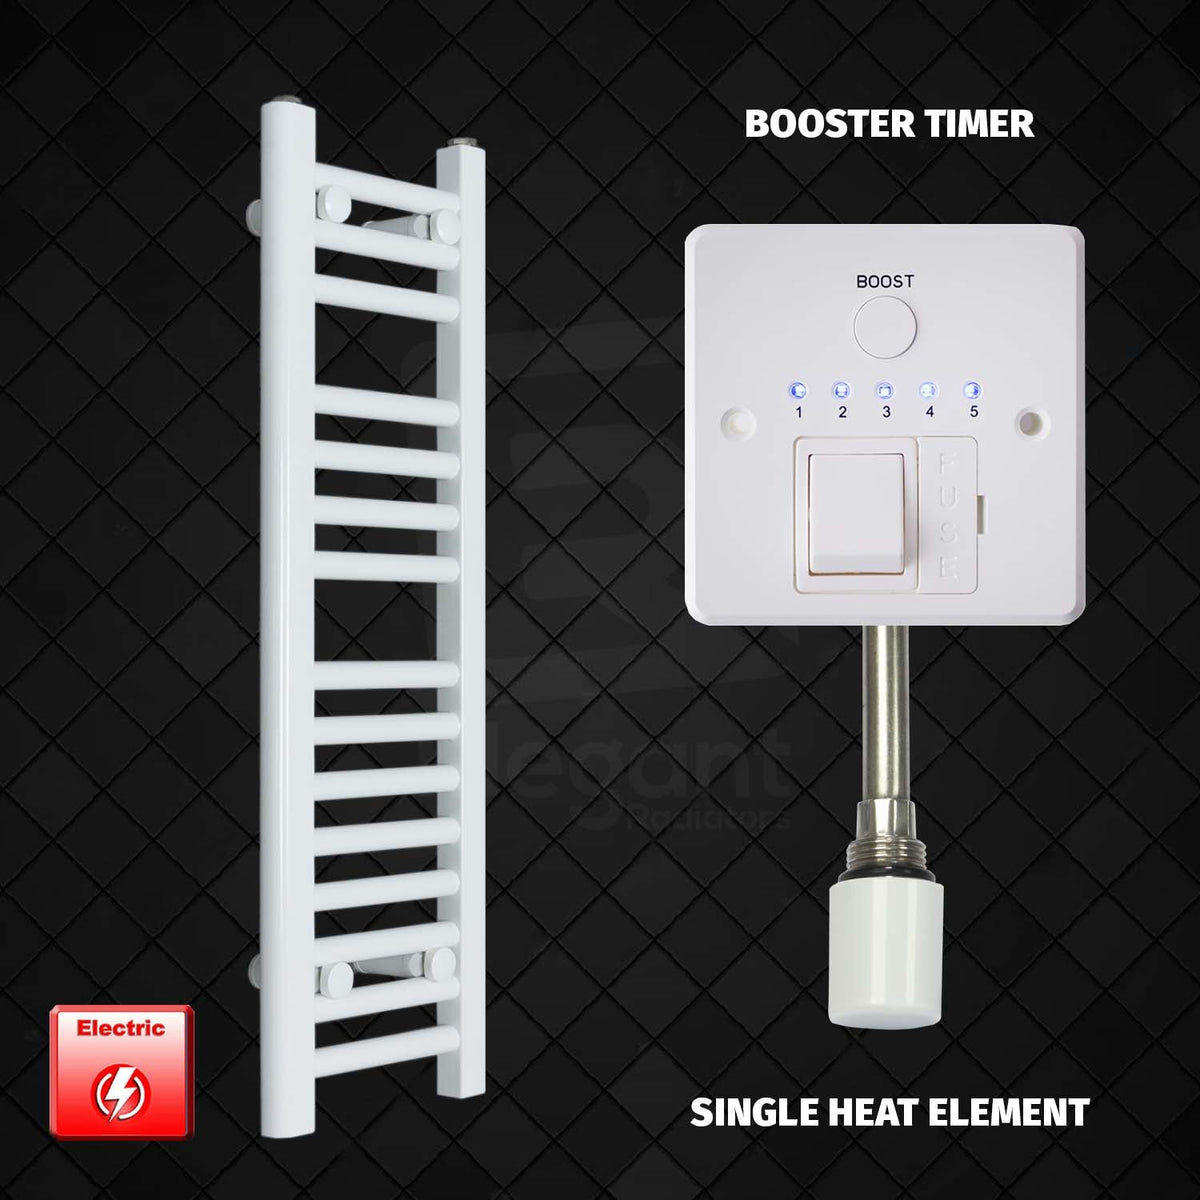 800 mm High 250 mm Wide Pre-Filled Electric Heated Towel Rail Radiator White Booster Timer